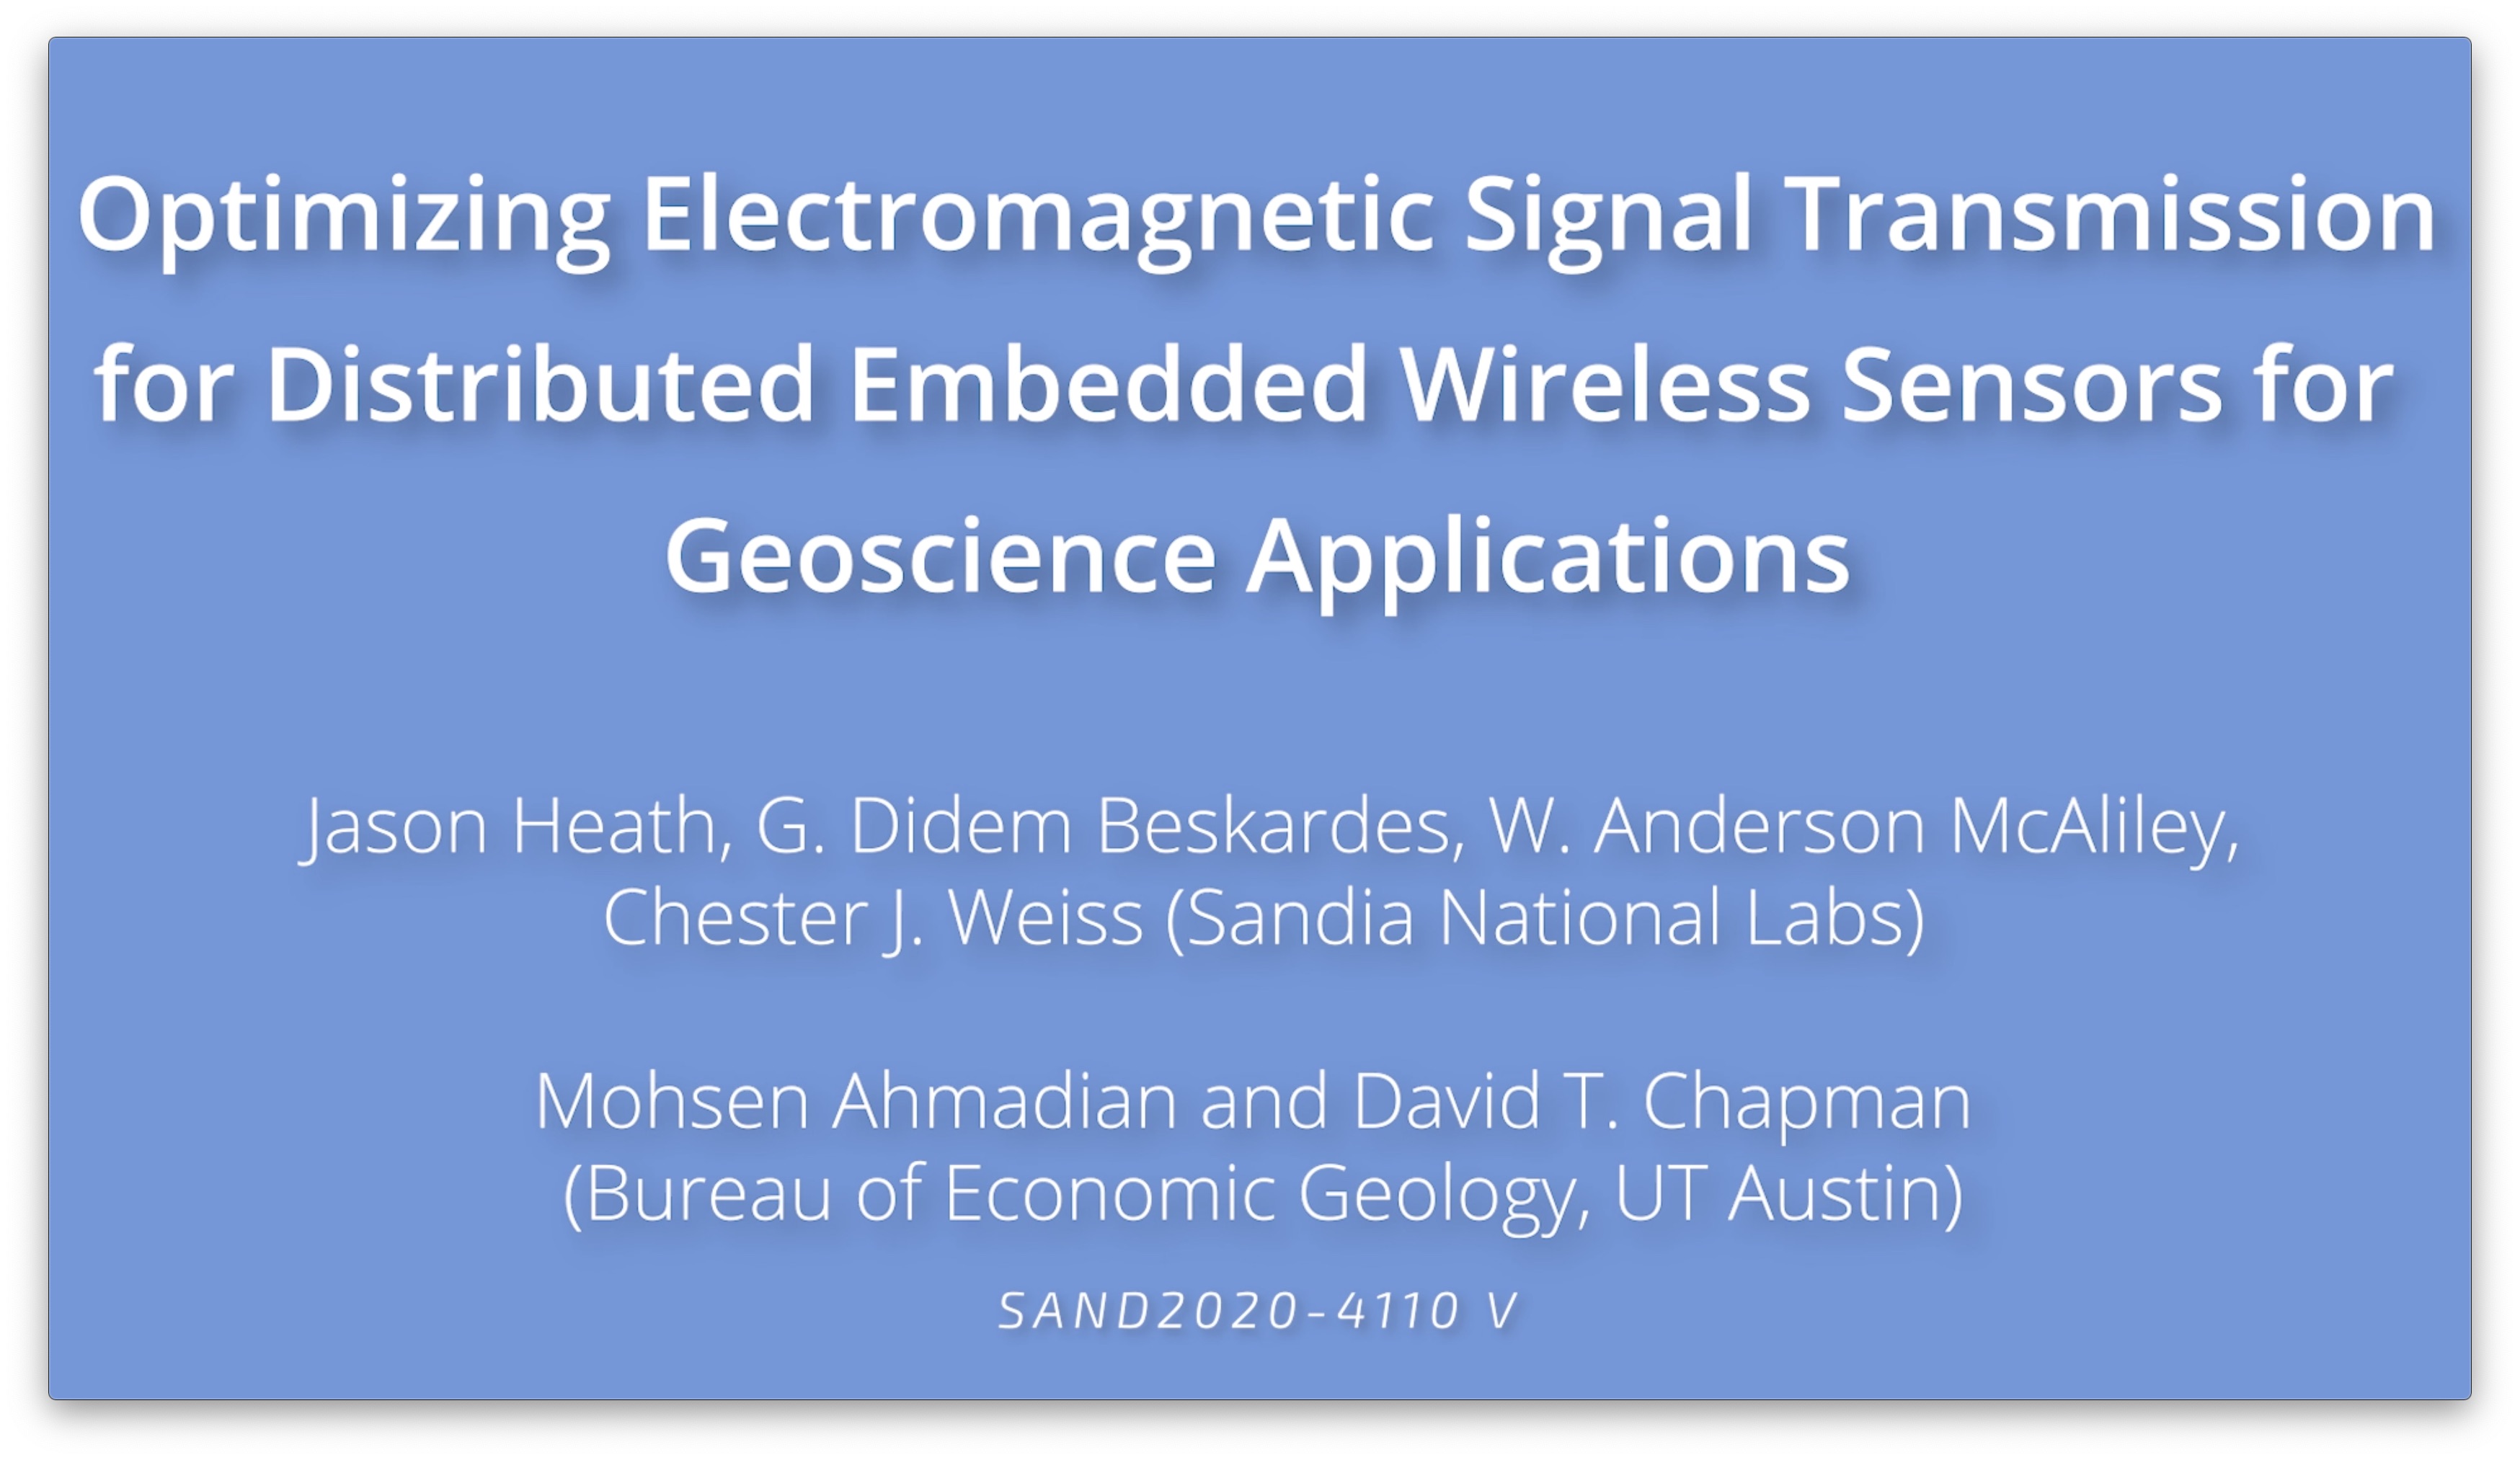 Optimizing Electromagnetic Signal Transmission for Distributed Embedded Wireless Sensors for Geoscience Applications